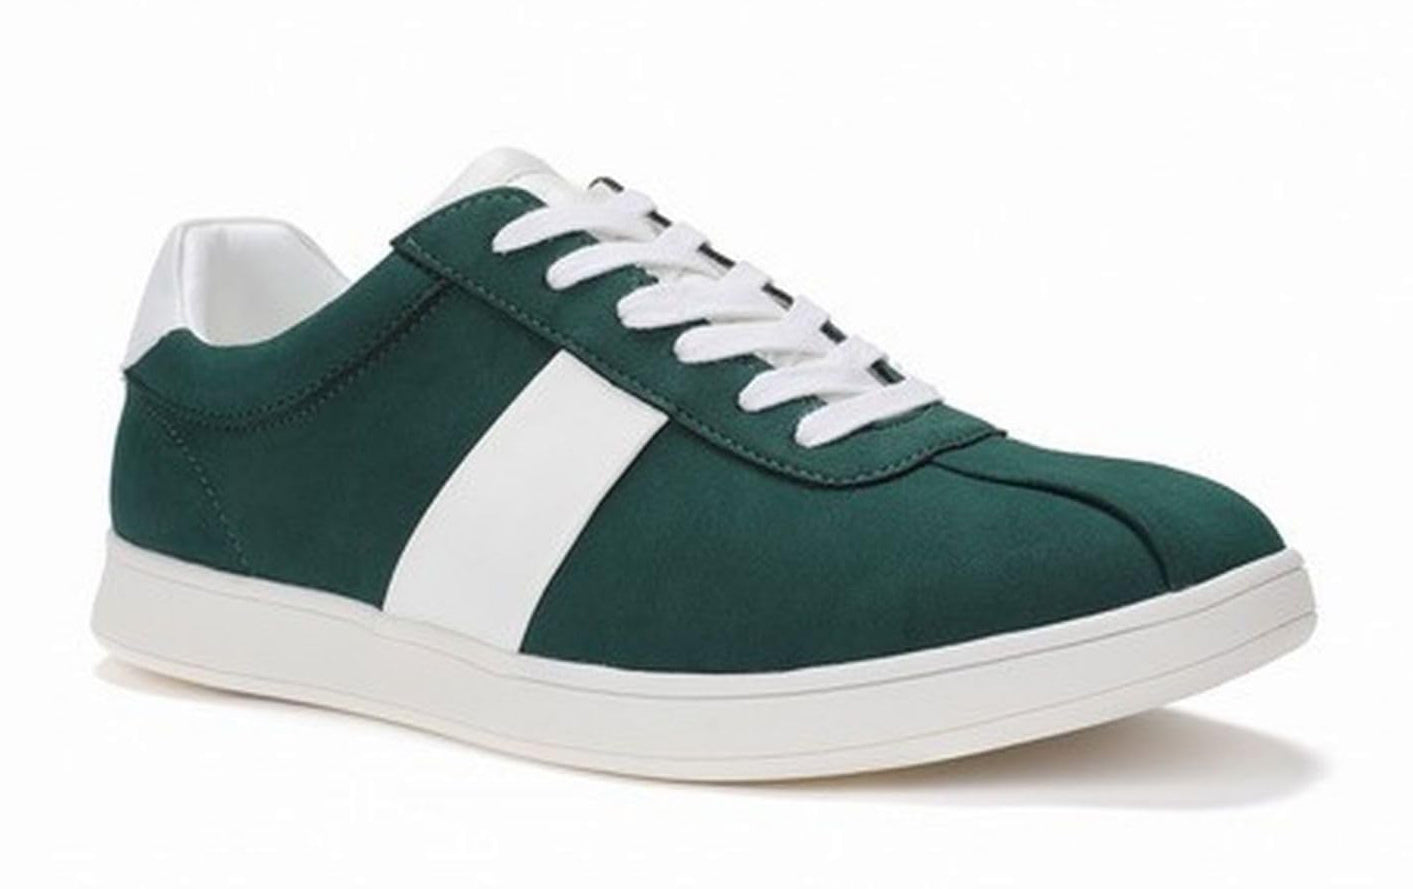 CLUB ROOM Mens Comfort Round Toe Lace-Up Athletic Sneakers EDWIN White / Green